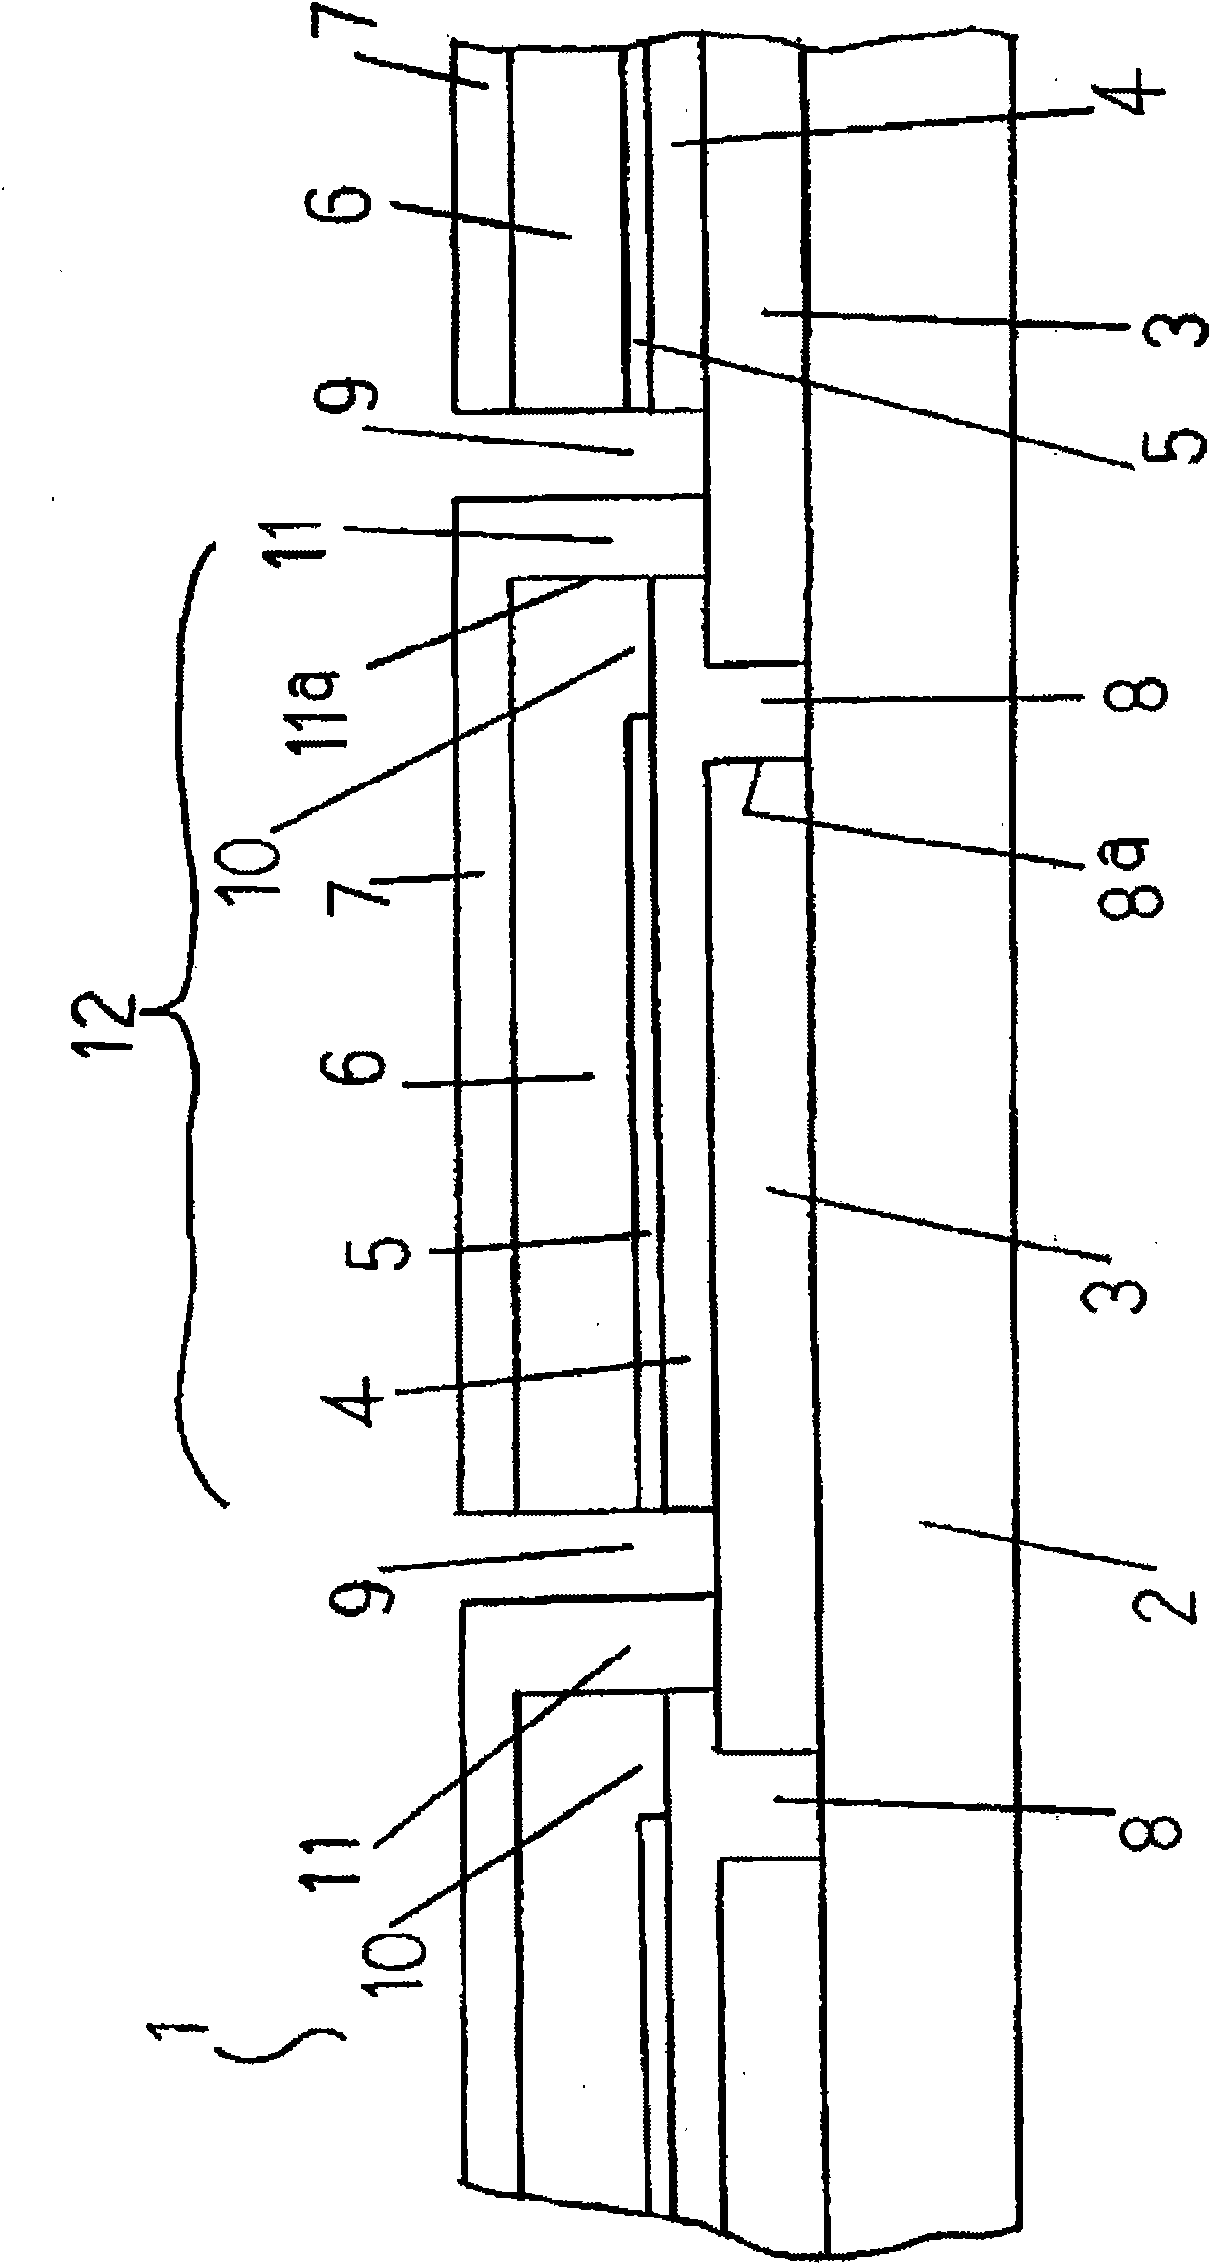 Integrated tandem-type thin film silicon solar cell module and method for manufacturing the same